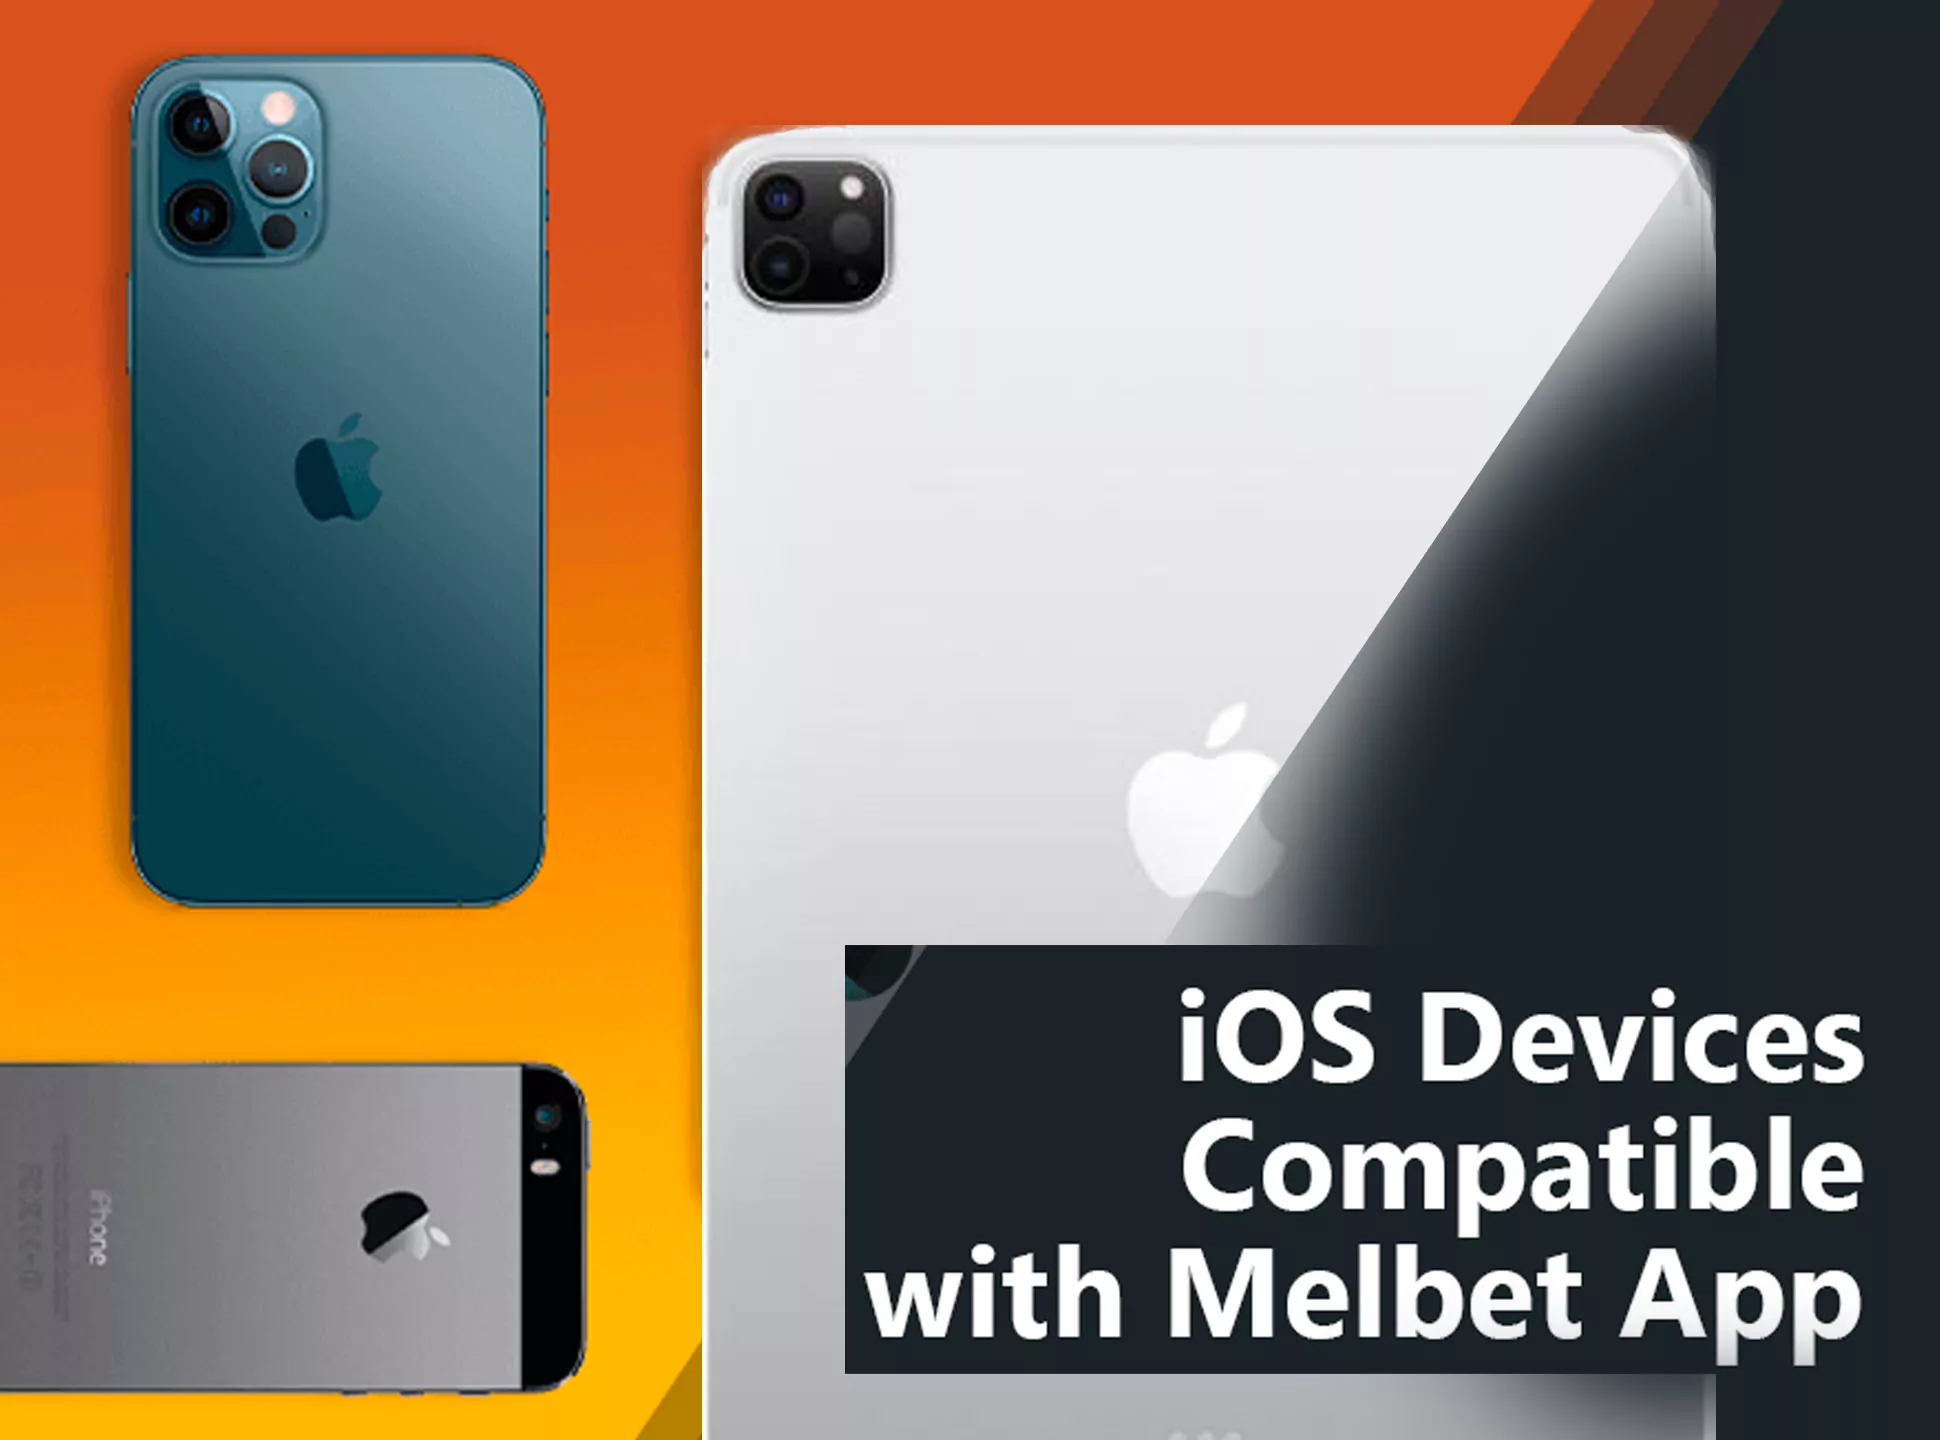 On which iOS smartphones will the melbet for iOS app run?